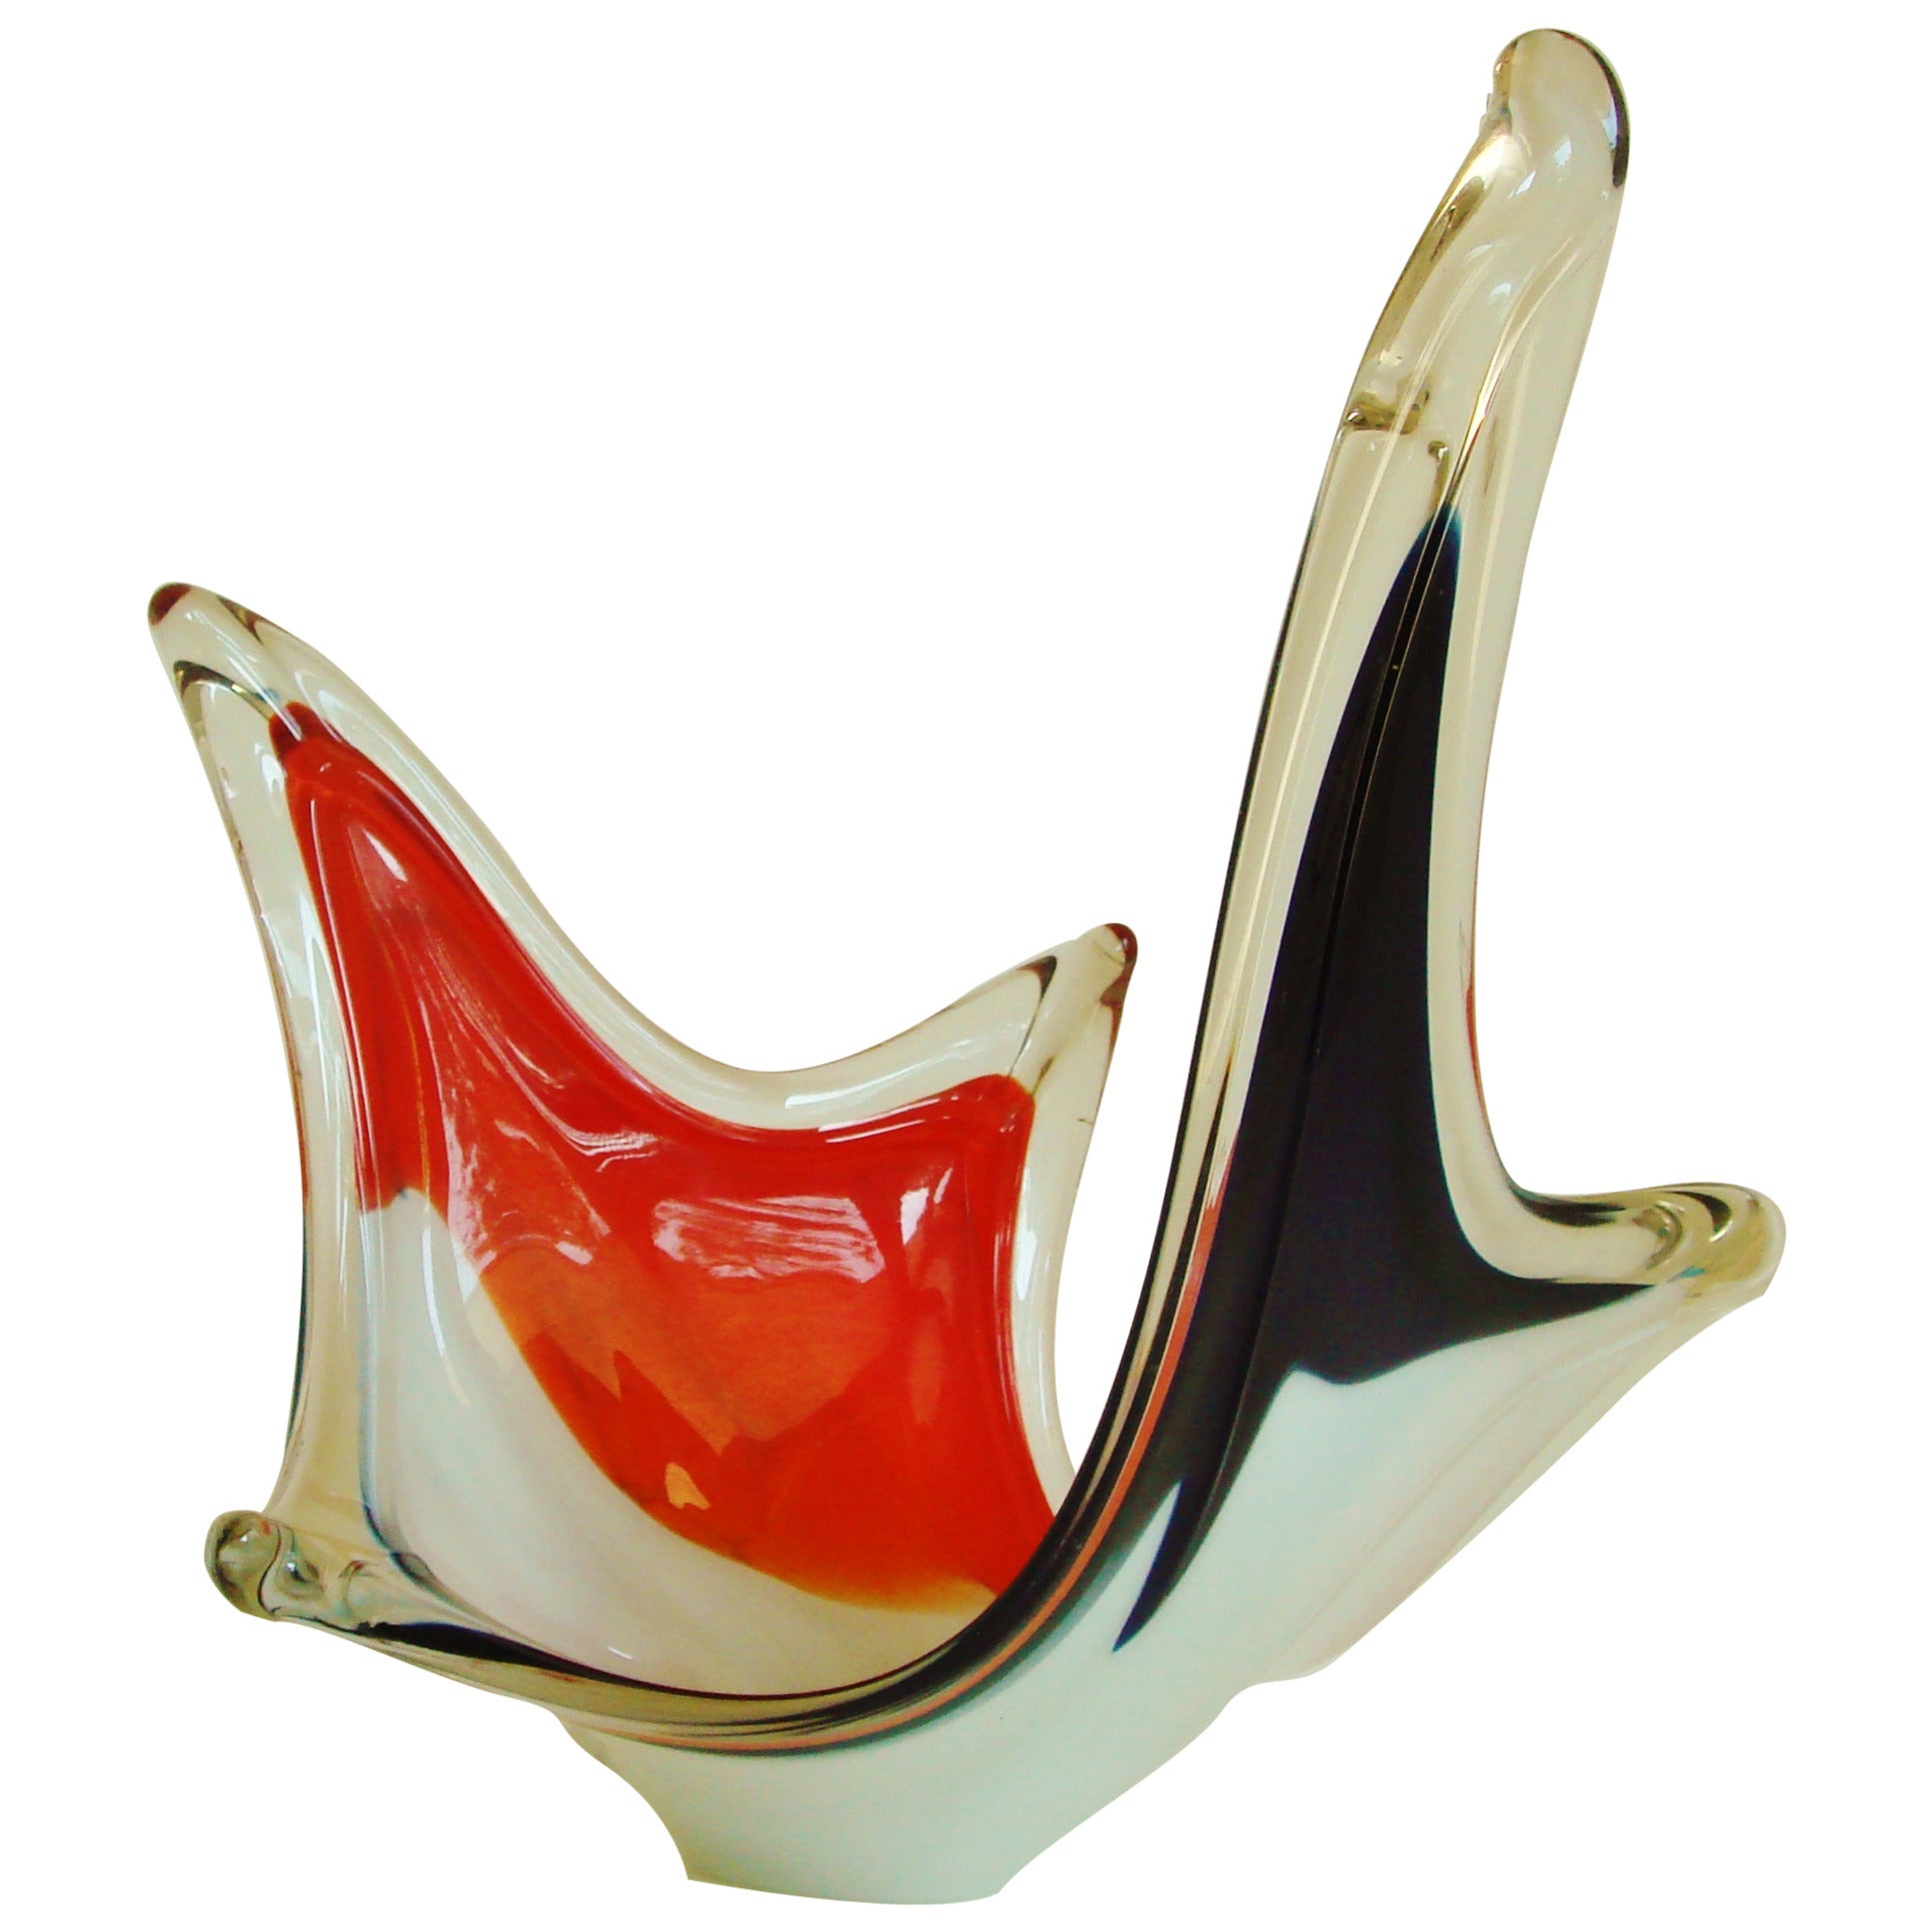 Swedish Midcentury Coquille Vide-Poche or Vase in the style of Flygfors